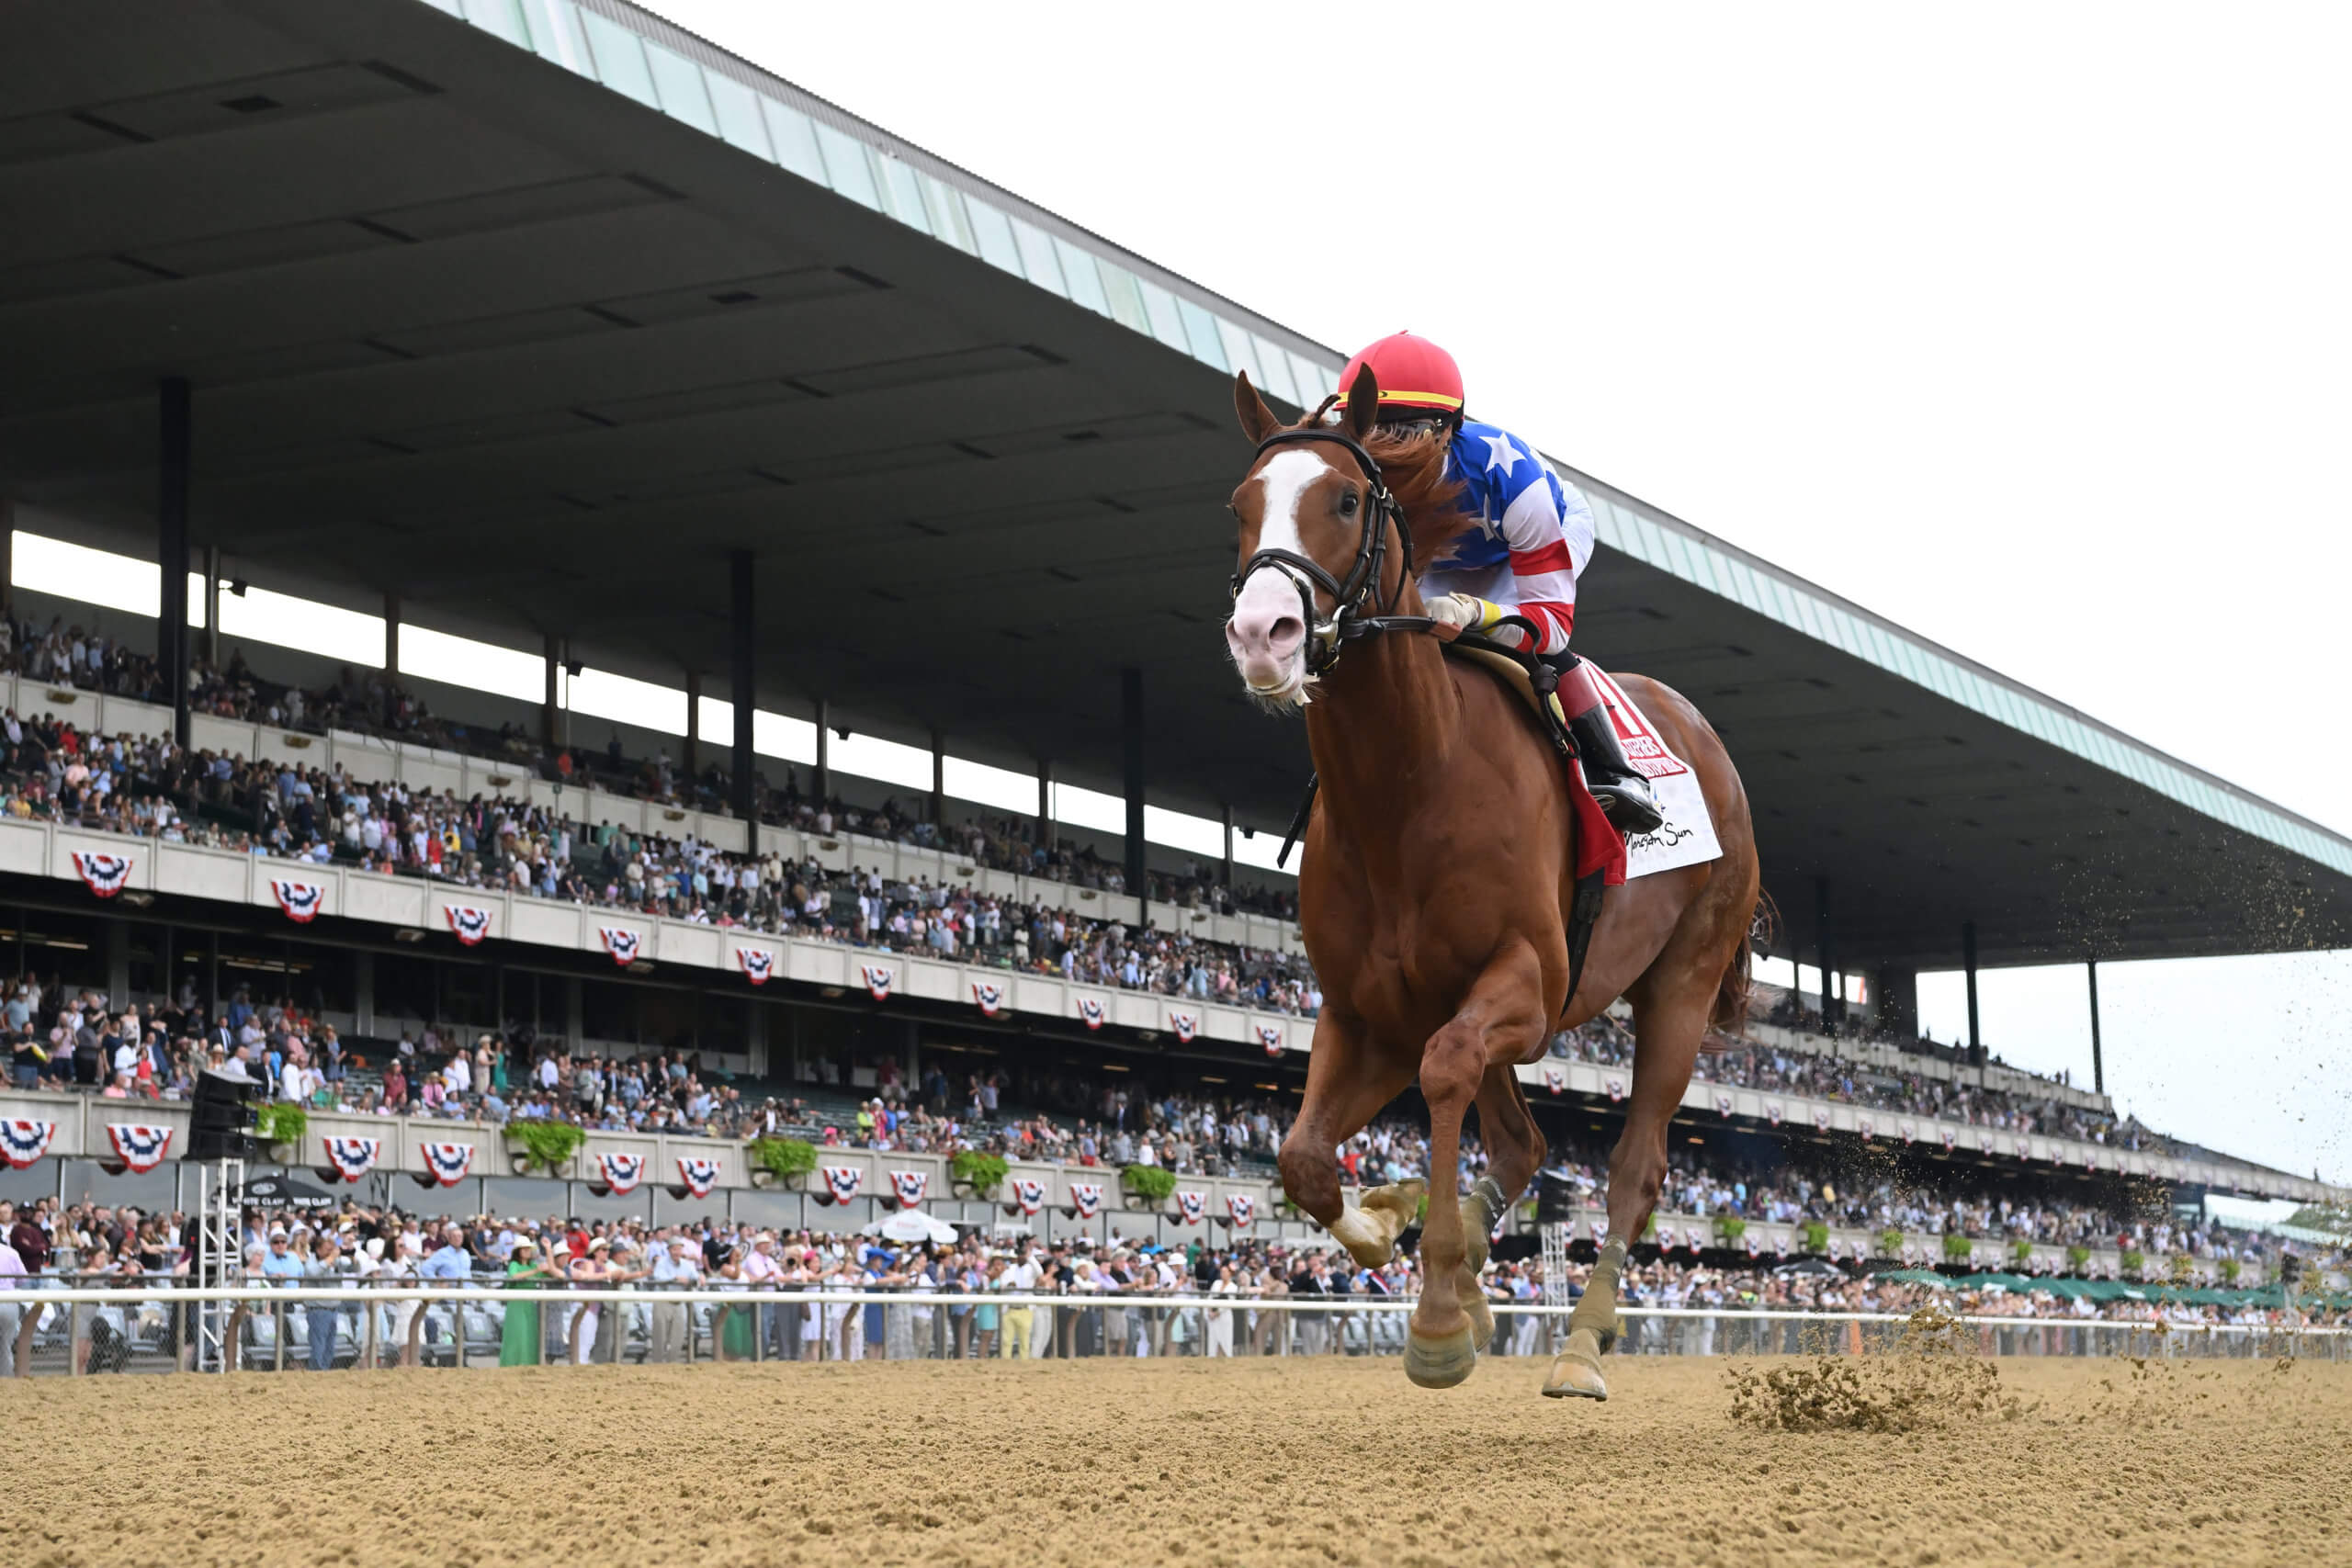 2023 Belmont Stakes post draw Results, full field, odds, more amNewYork